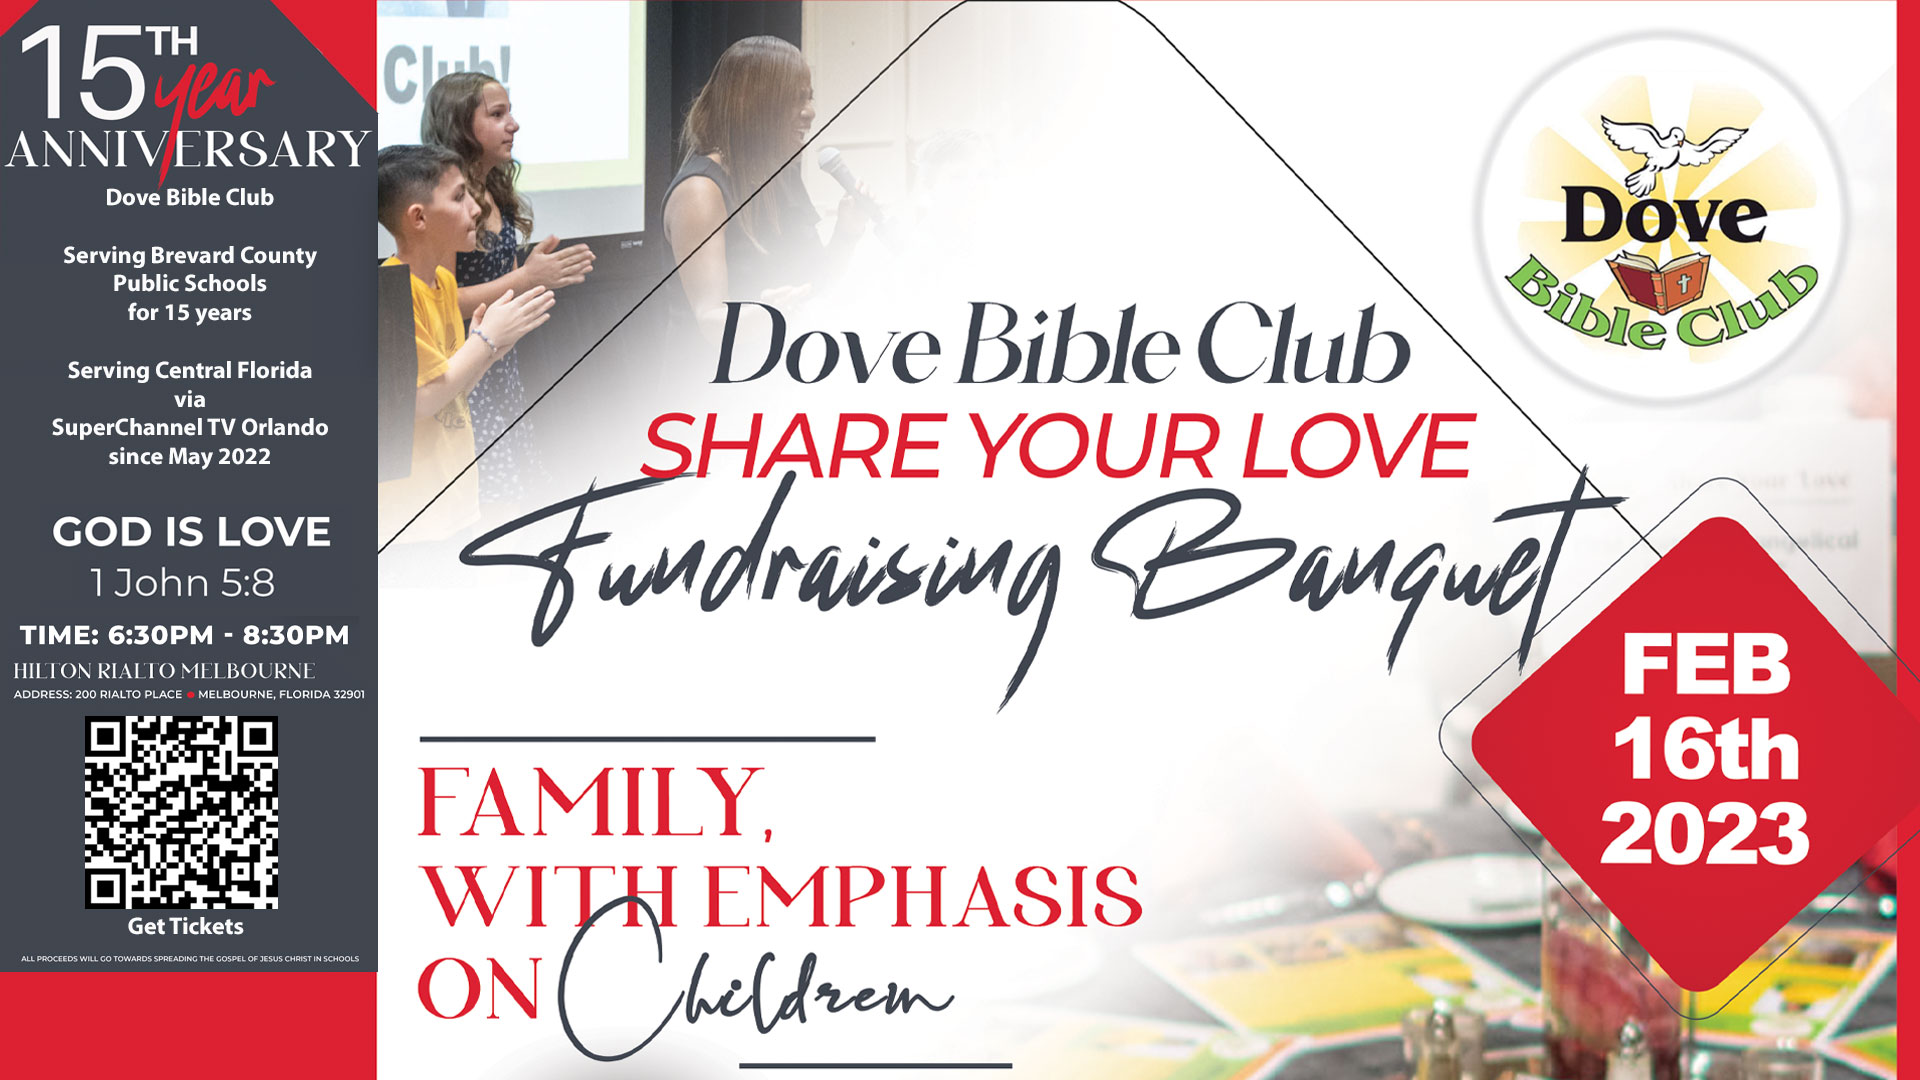 Dove Bible Club Share Your Love Banquet